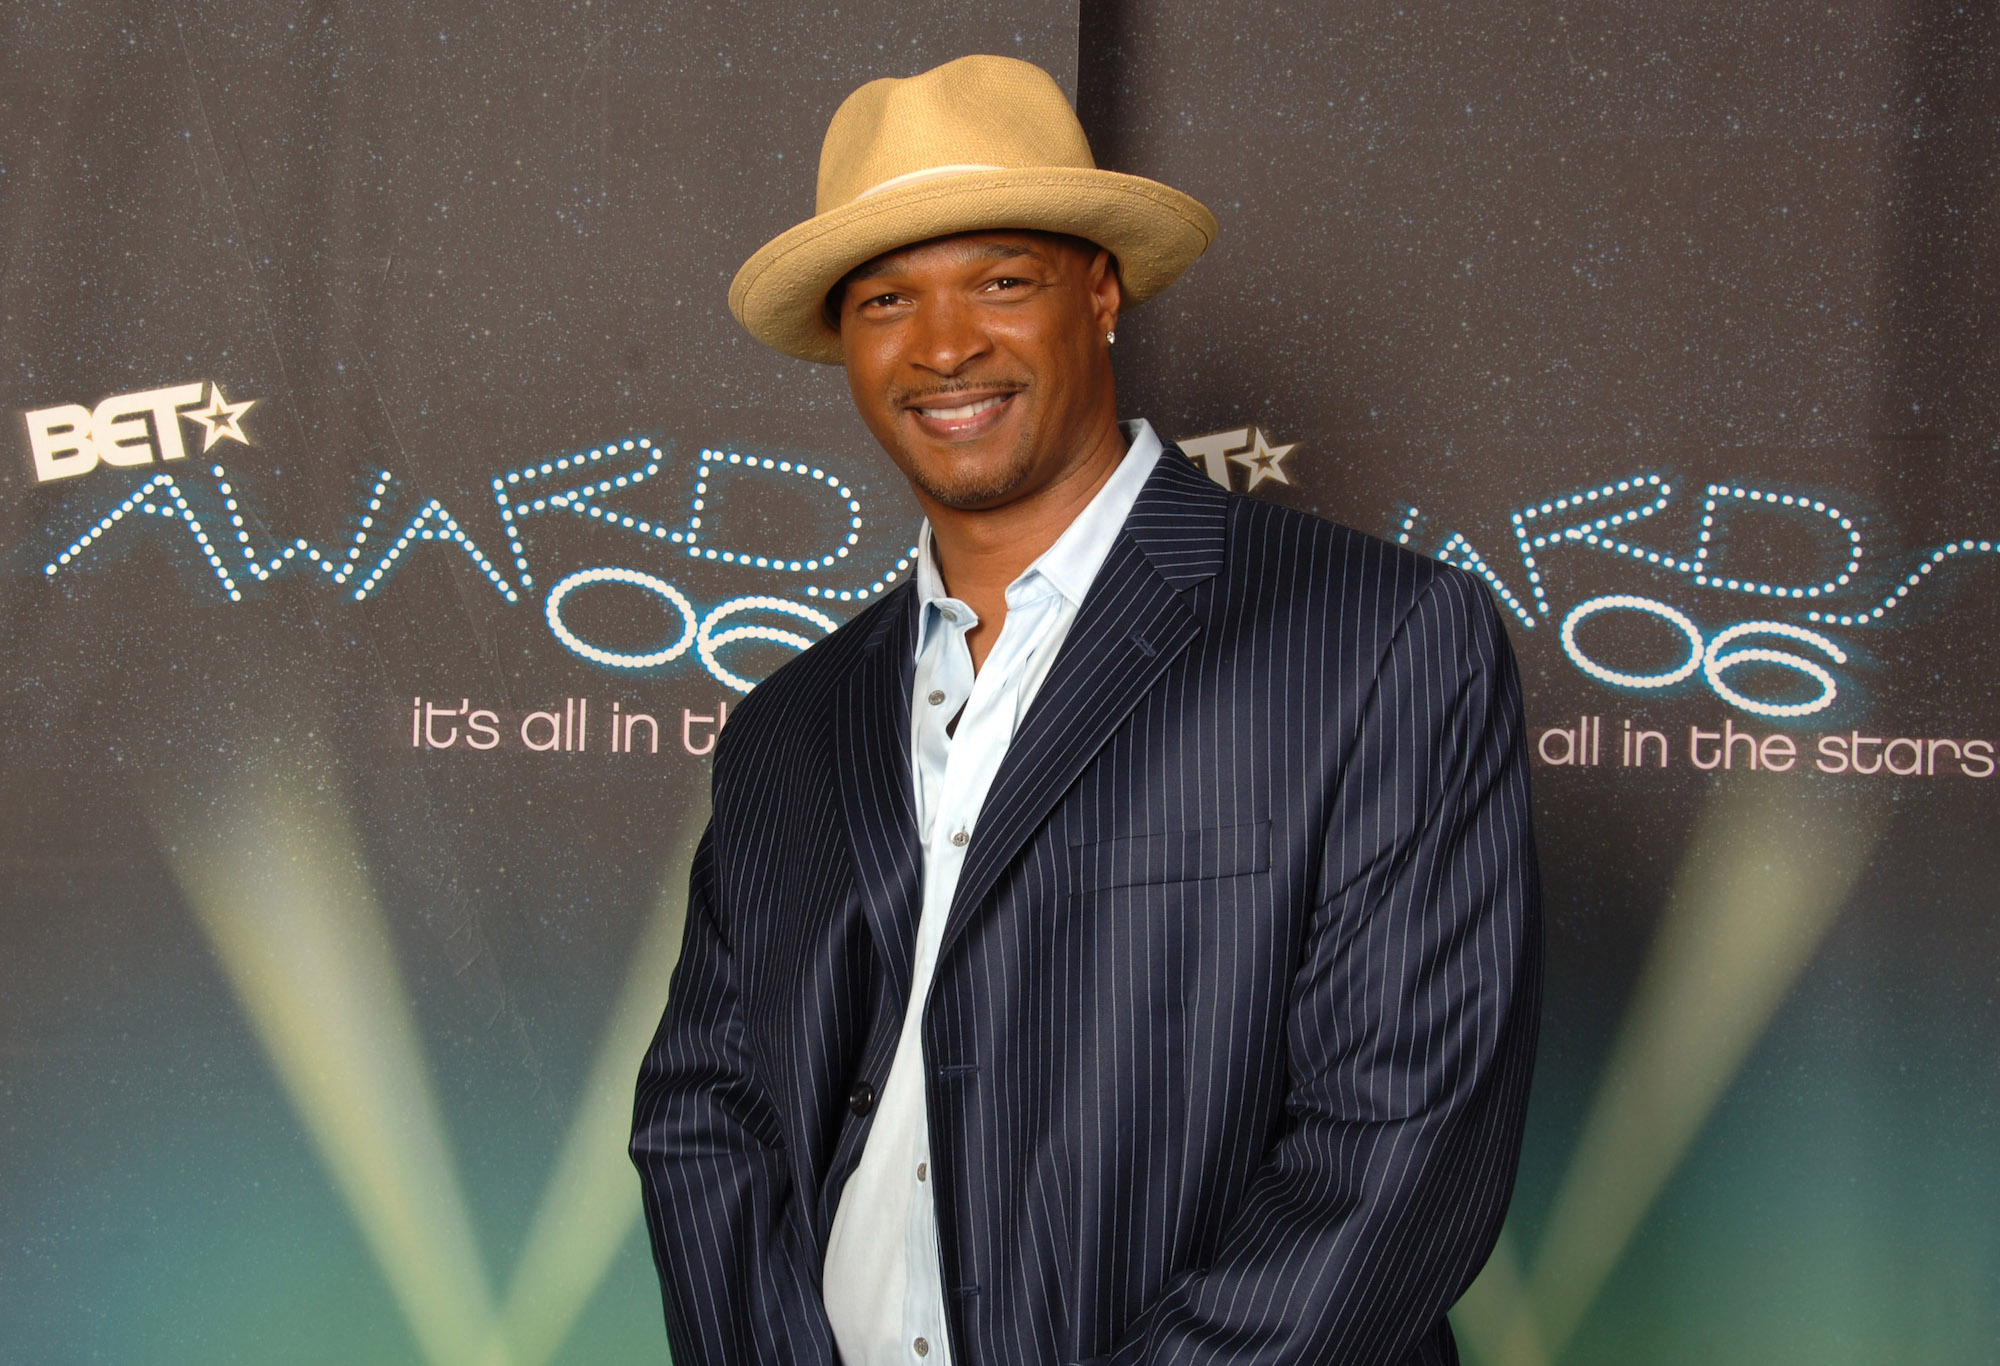 Damon Wayans Behind the Scenes promo shoot for the 2006 BET Awards scheduled to air June 27, 2006